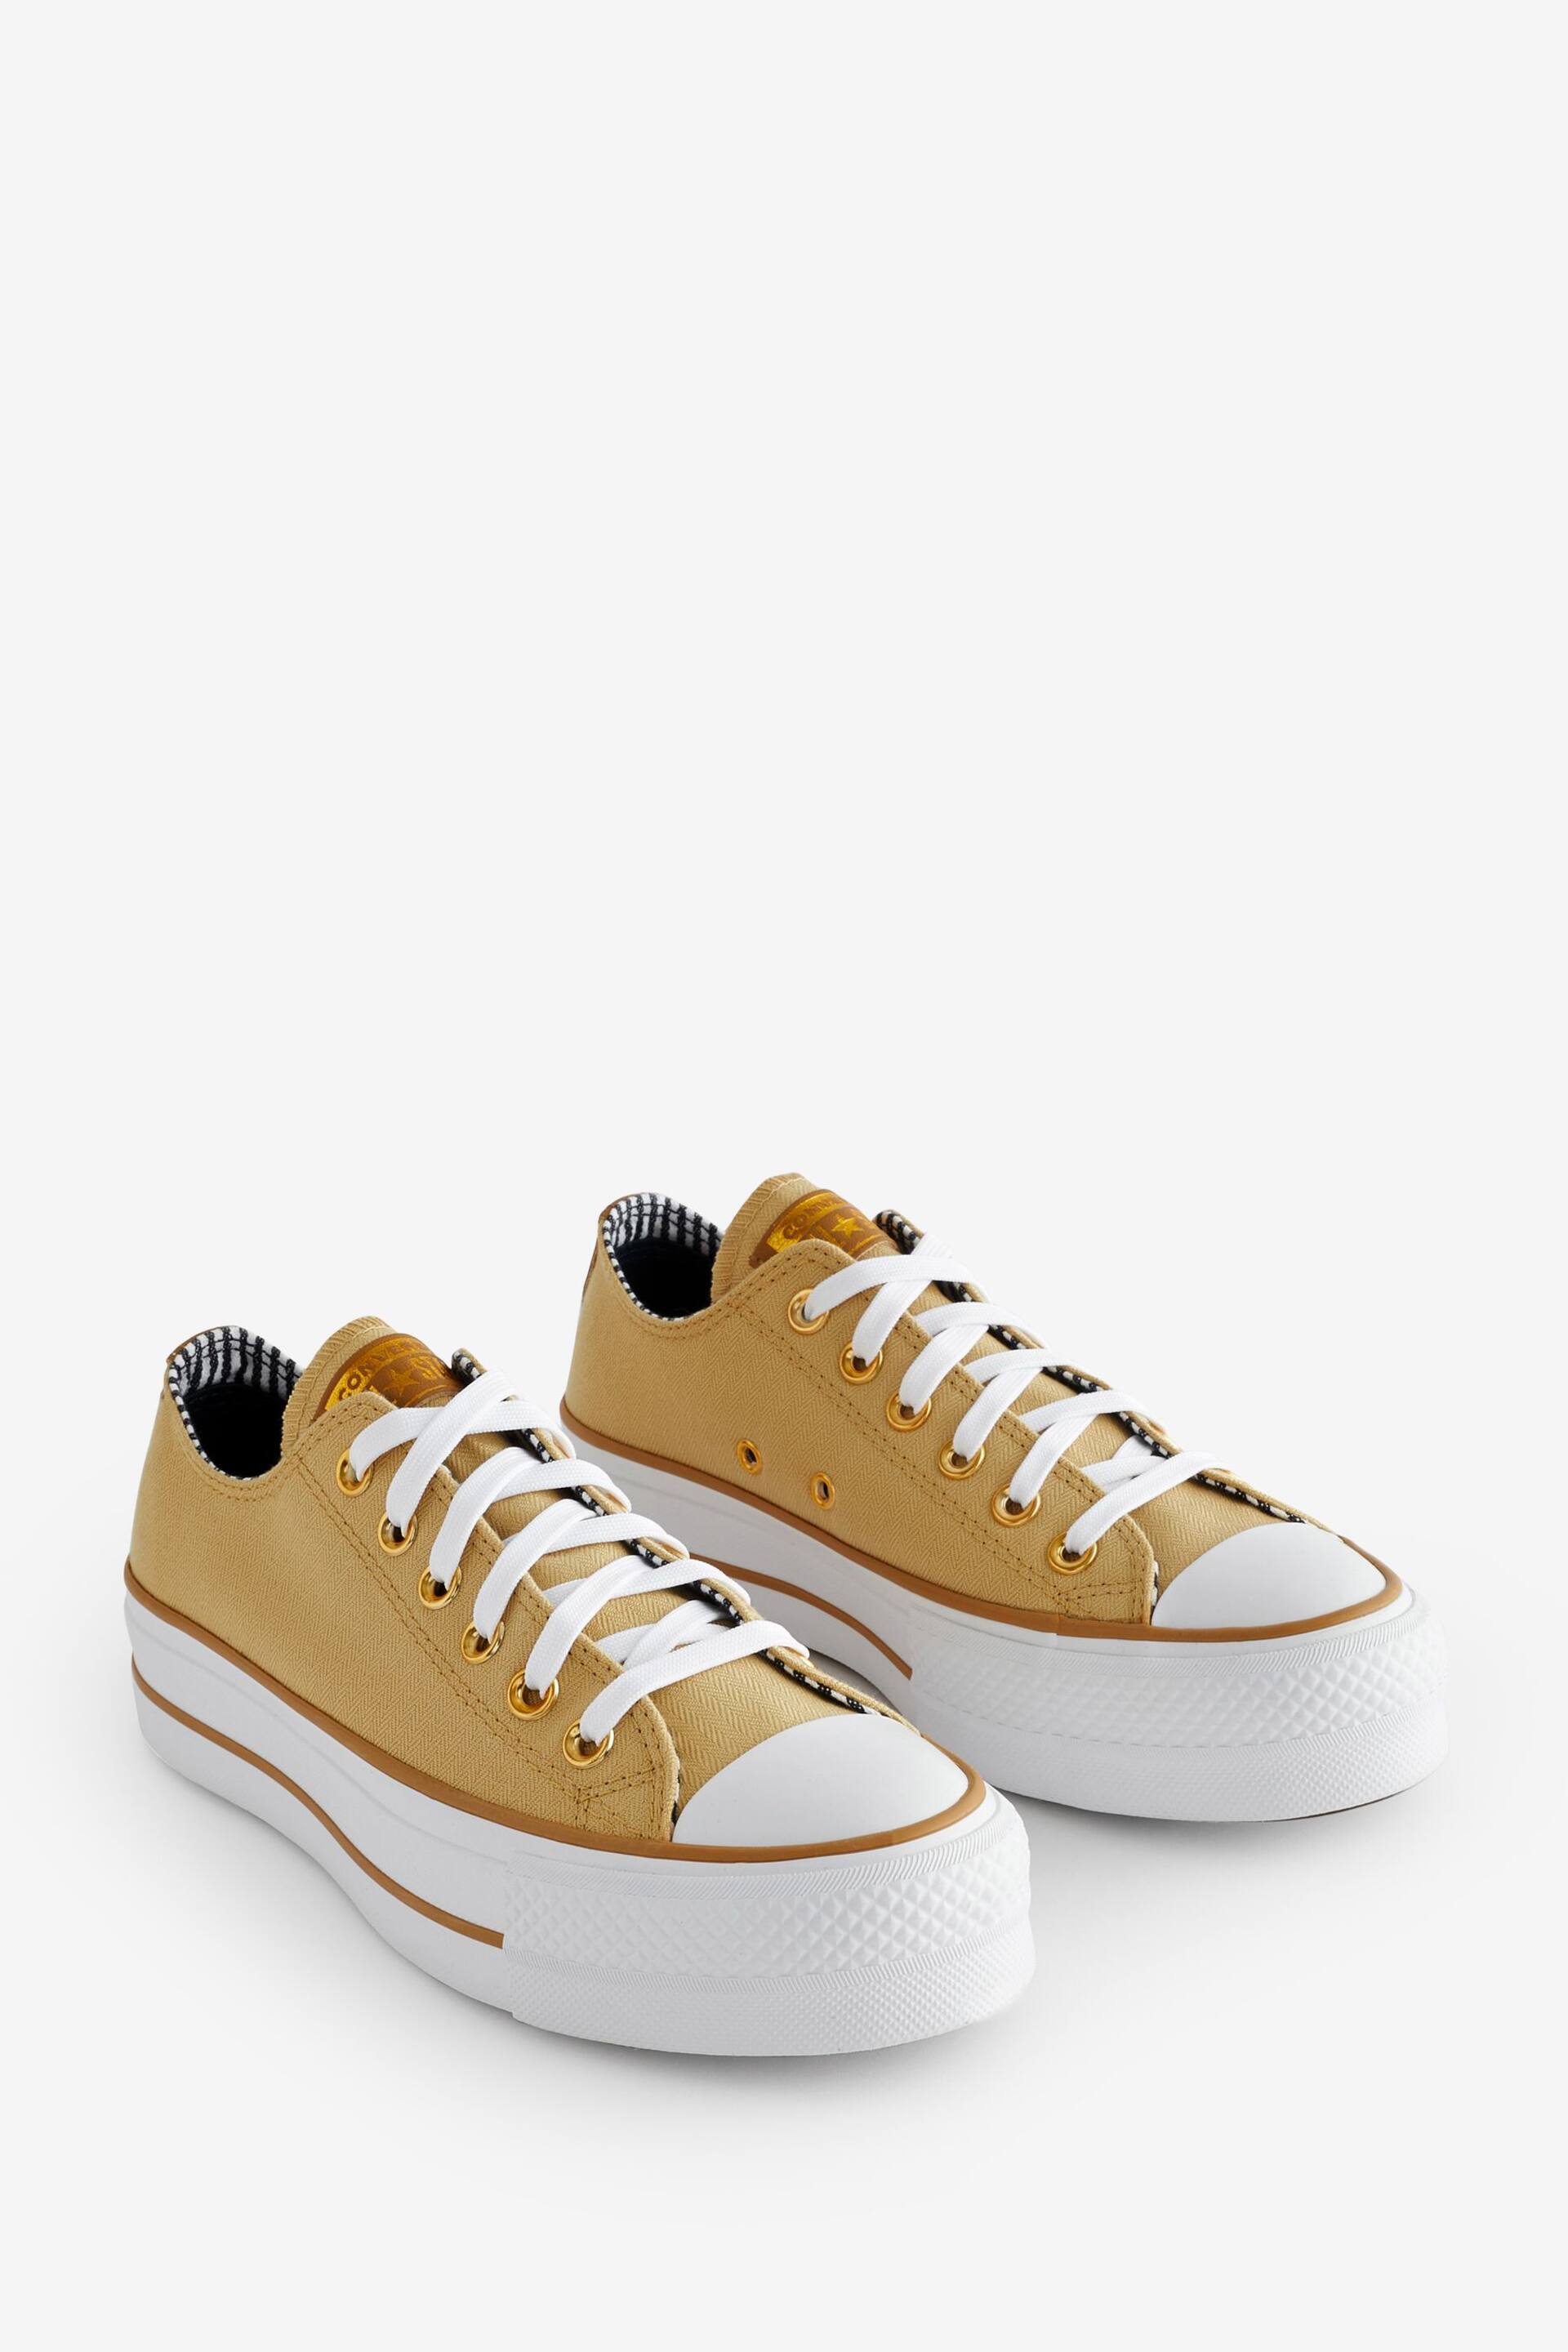 Converse Yellow Lift Chuck Ox Trainers - Image 3 of 9